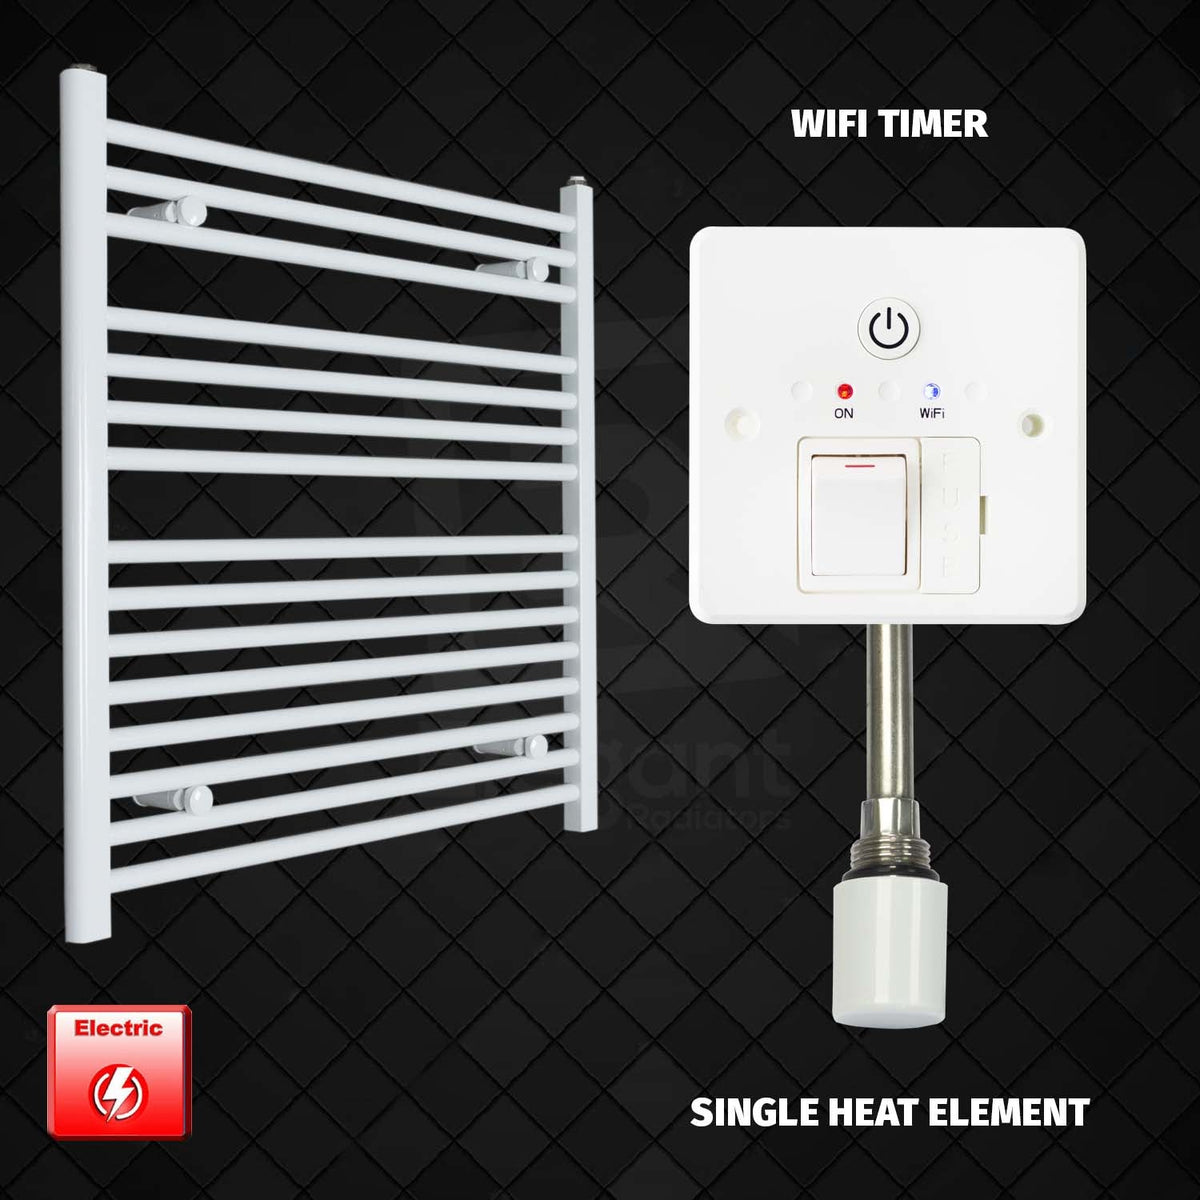 800 mm High 750 mm Wide Pre-Filled Electric Heated Towel Rail Radiator White HTR Single heat element Wifi timer